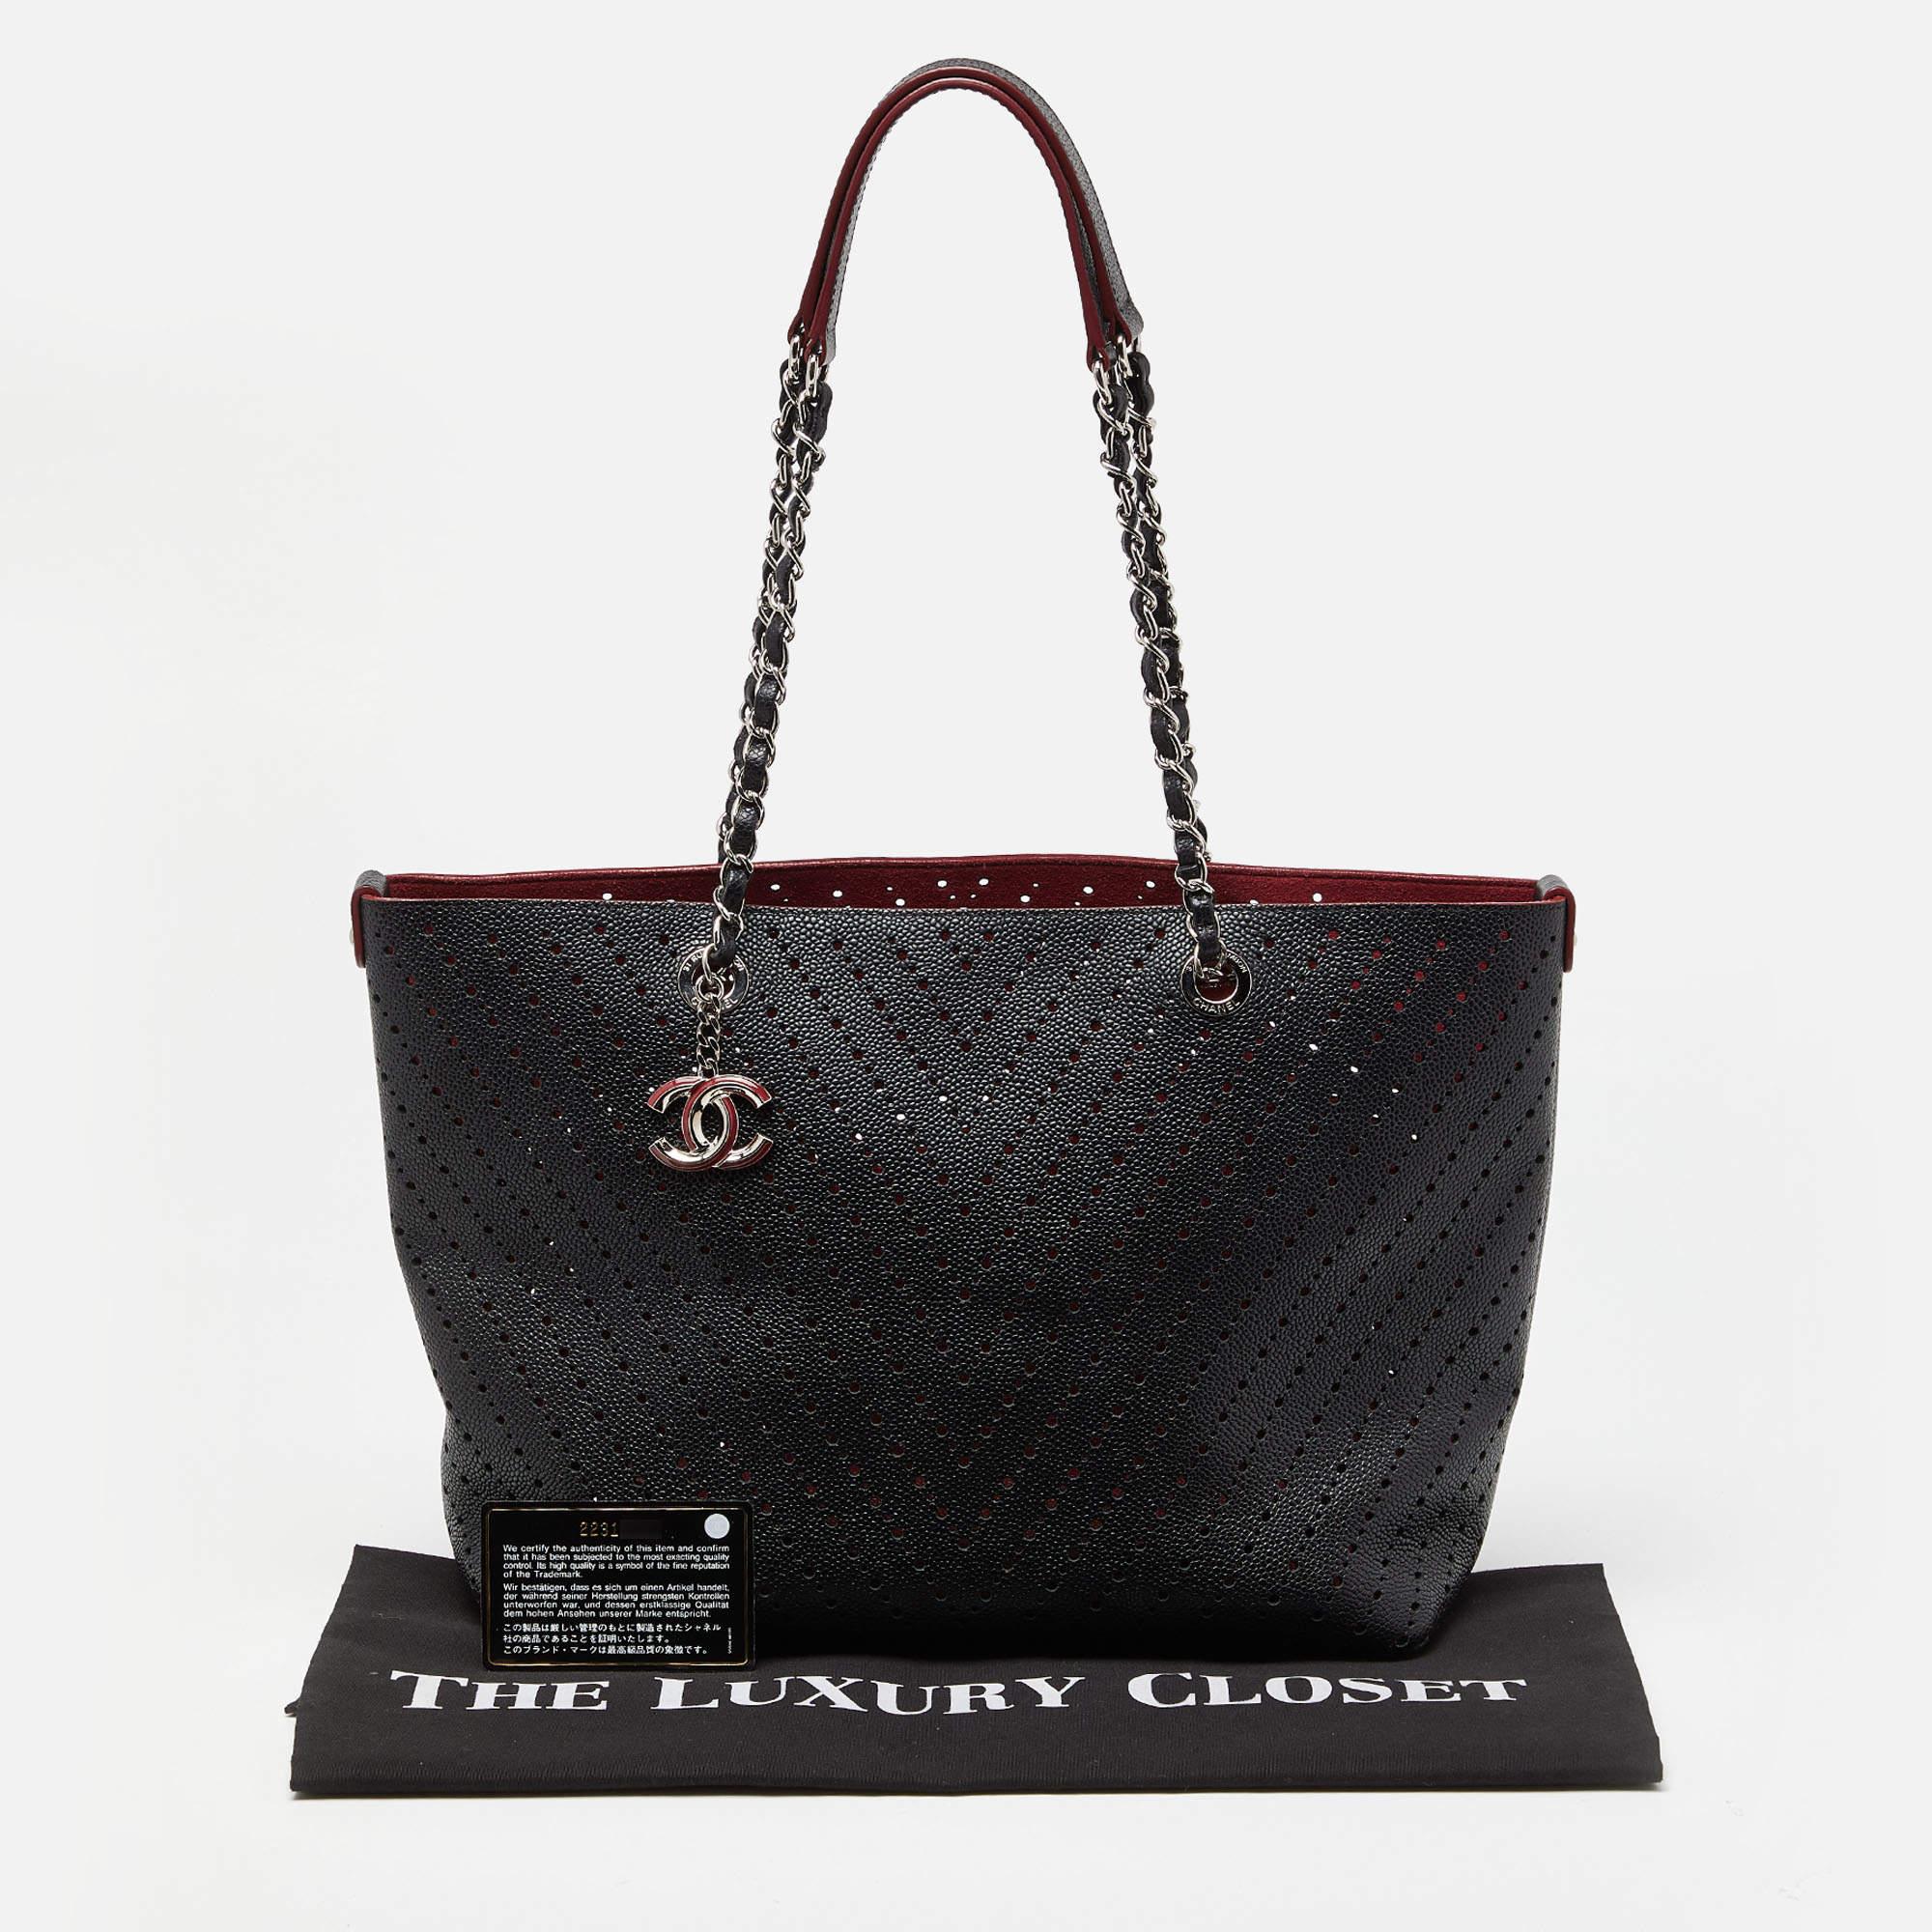 Chanel Black Perforated Caviar Leather Medium Shopper Tote For Sale 8